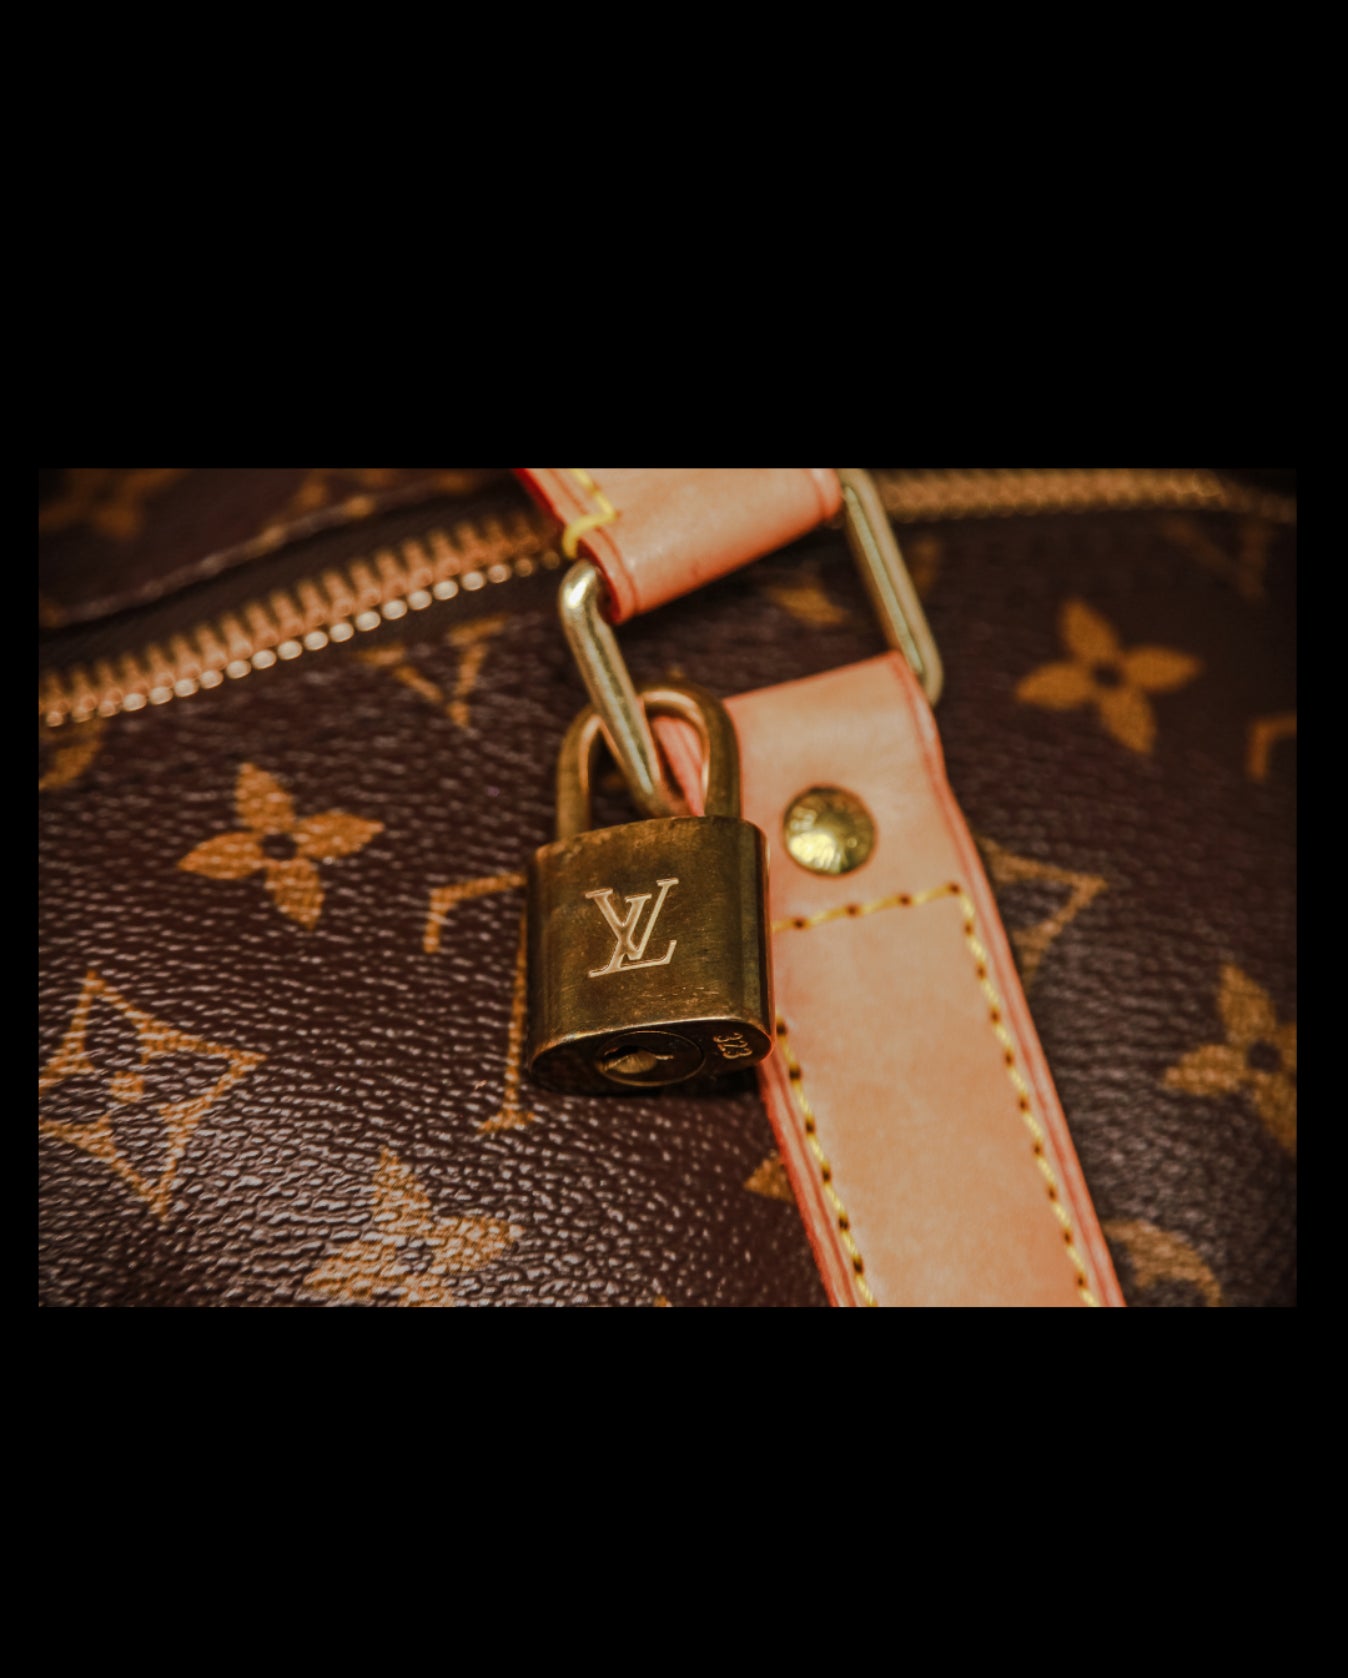 Louis Vuitton Keepall Bandouliere Monogram Mesh 50 - 4 For Sale on